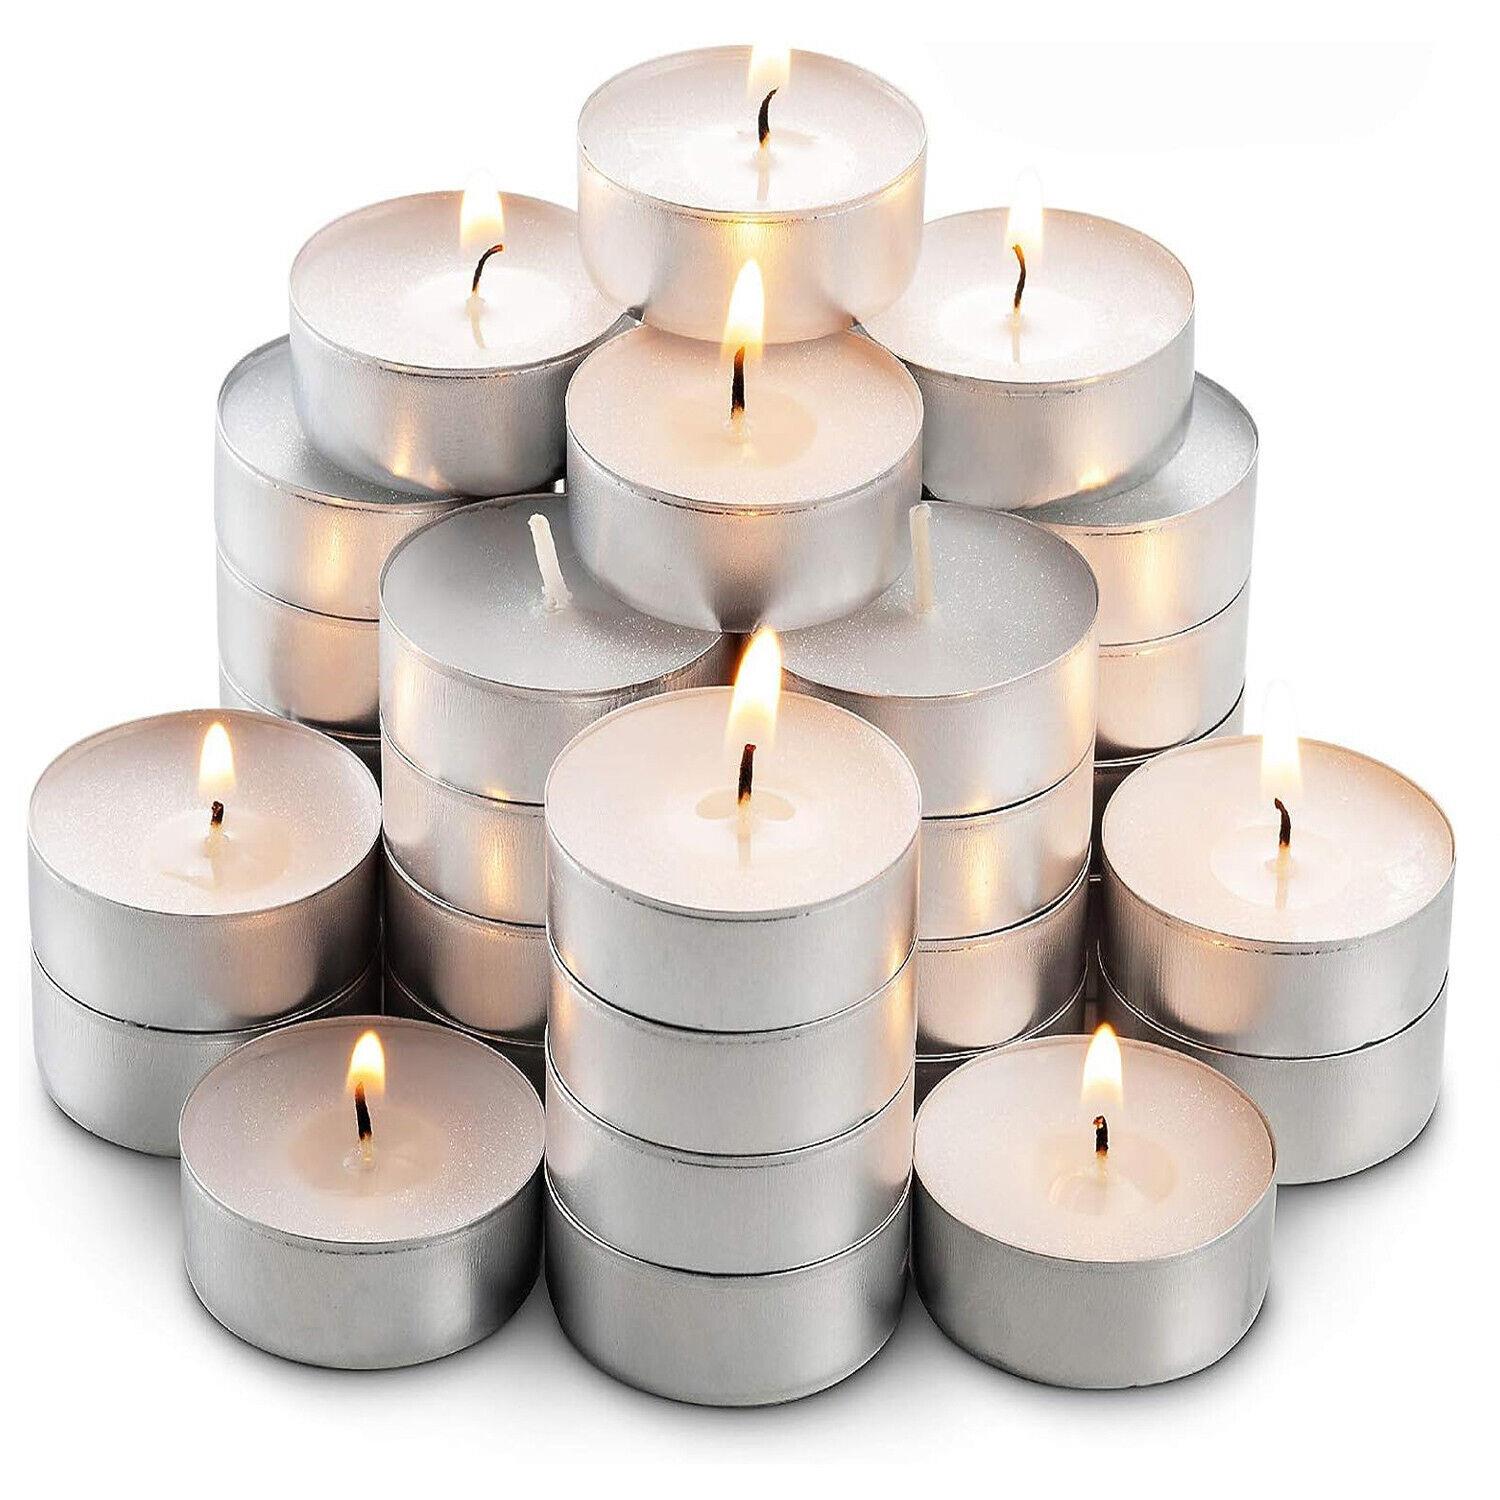 Tealight Candles by GEEZY - The Magic Toy Shop